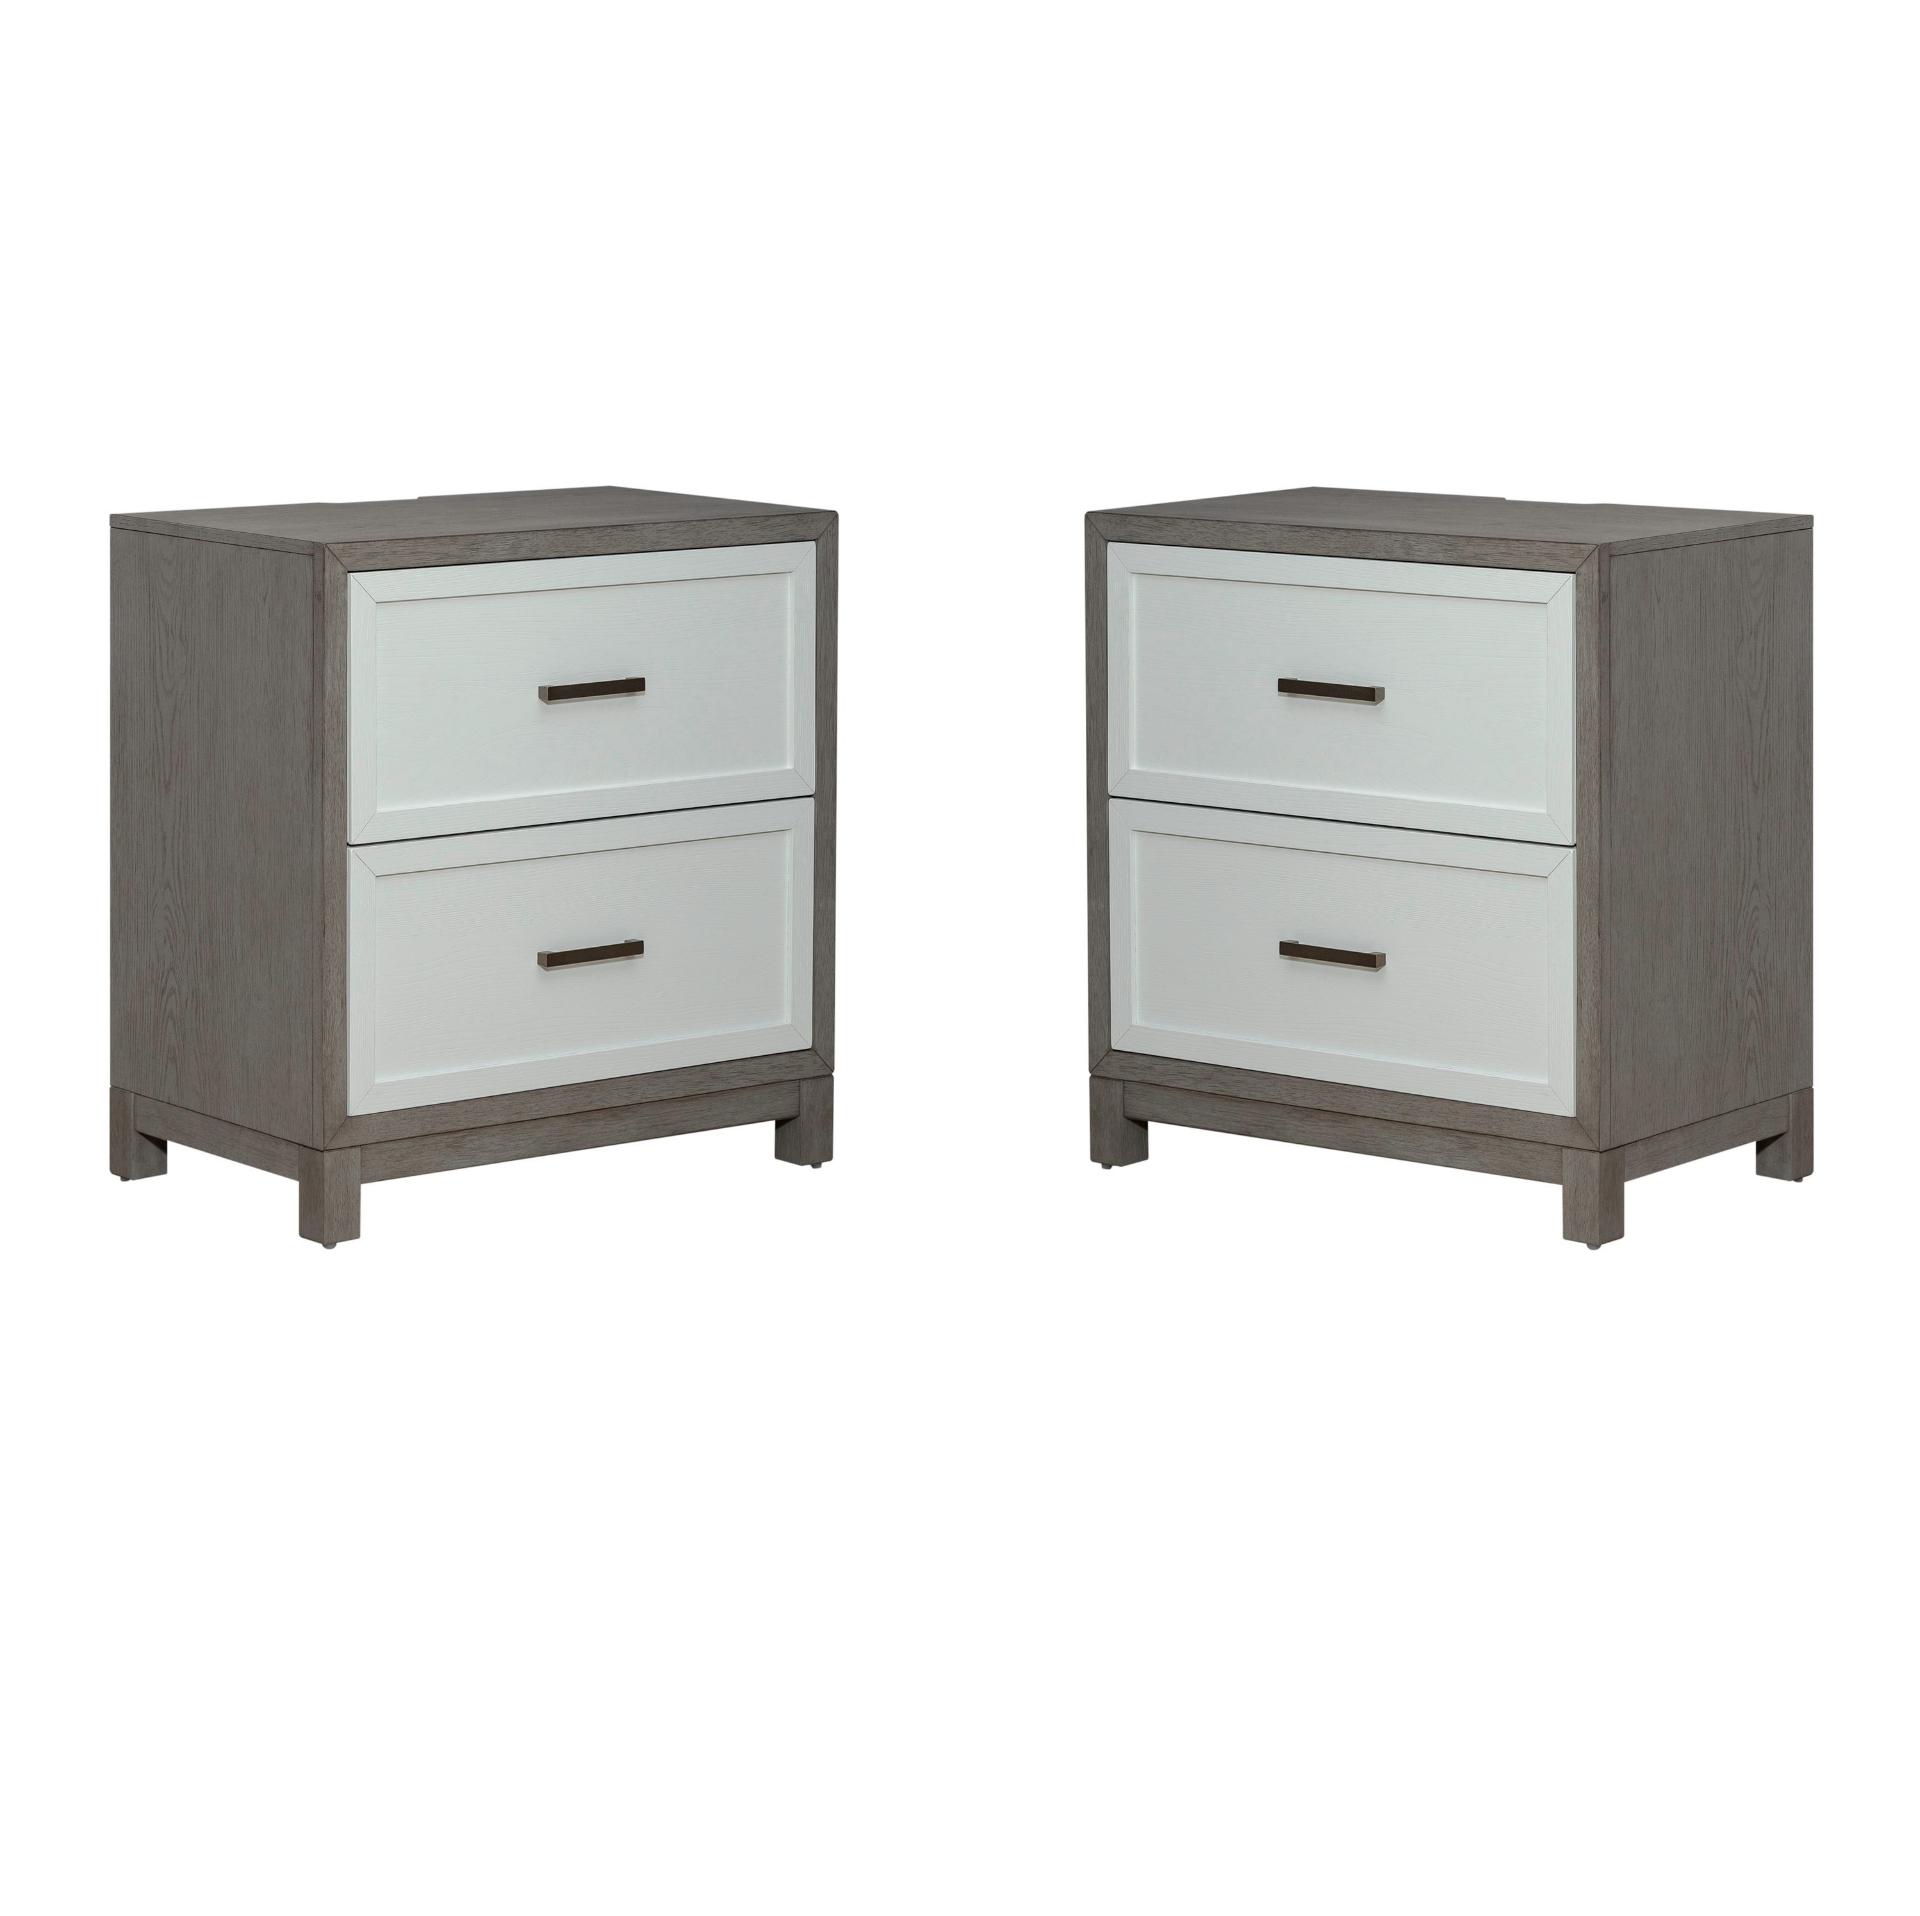 Liberty Furniture Palmetto Heights (499-BR) Nightstand Set